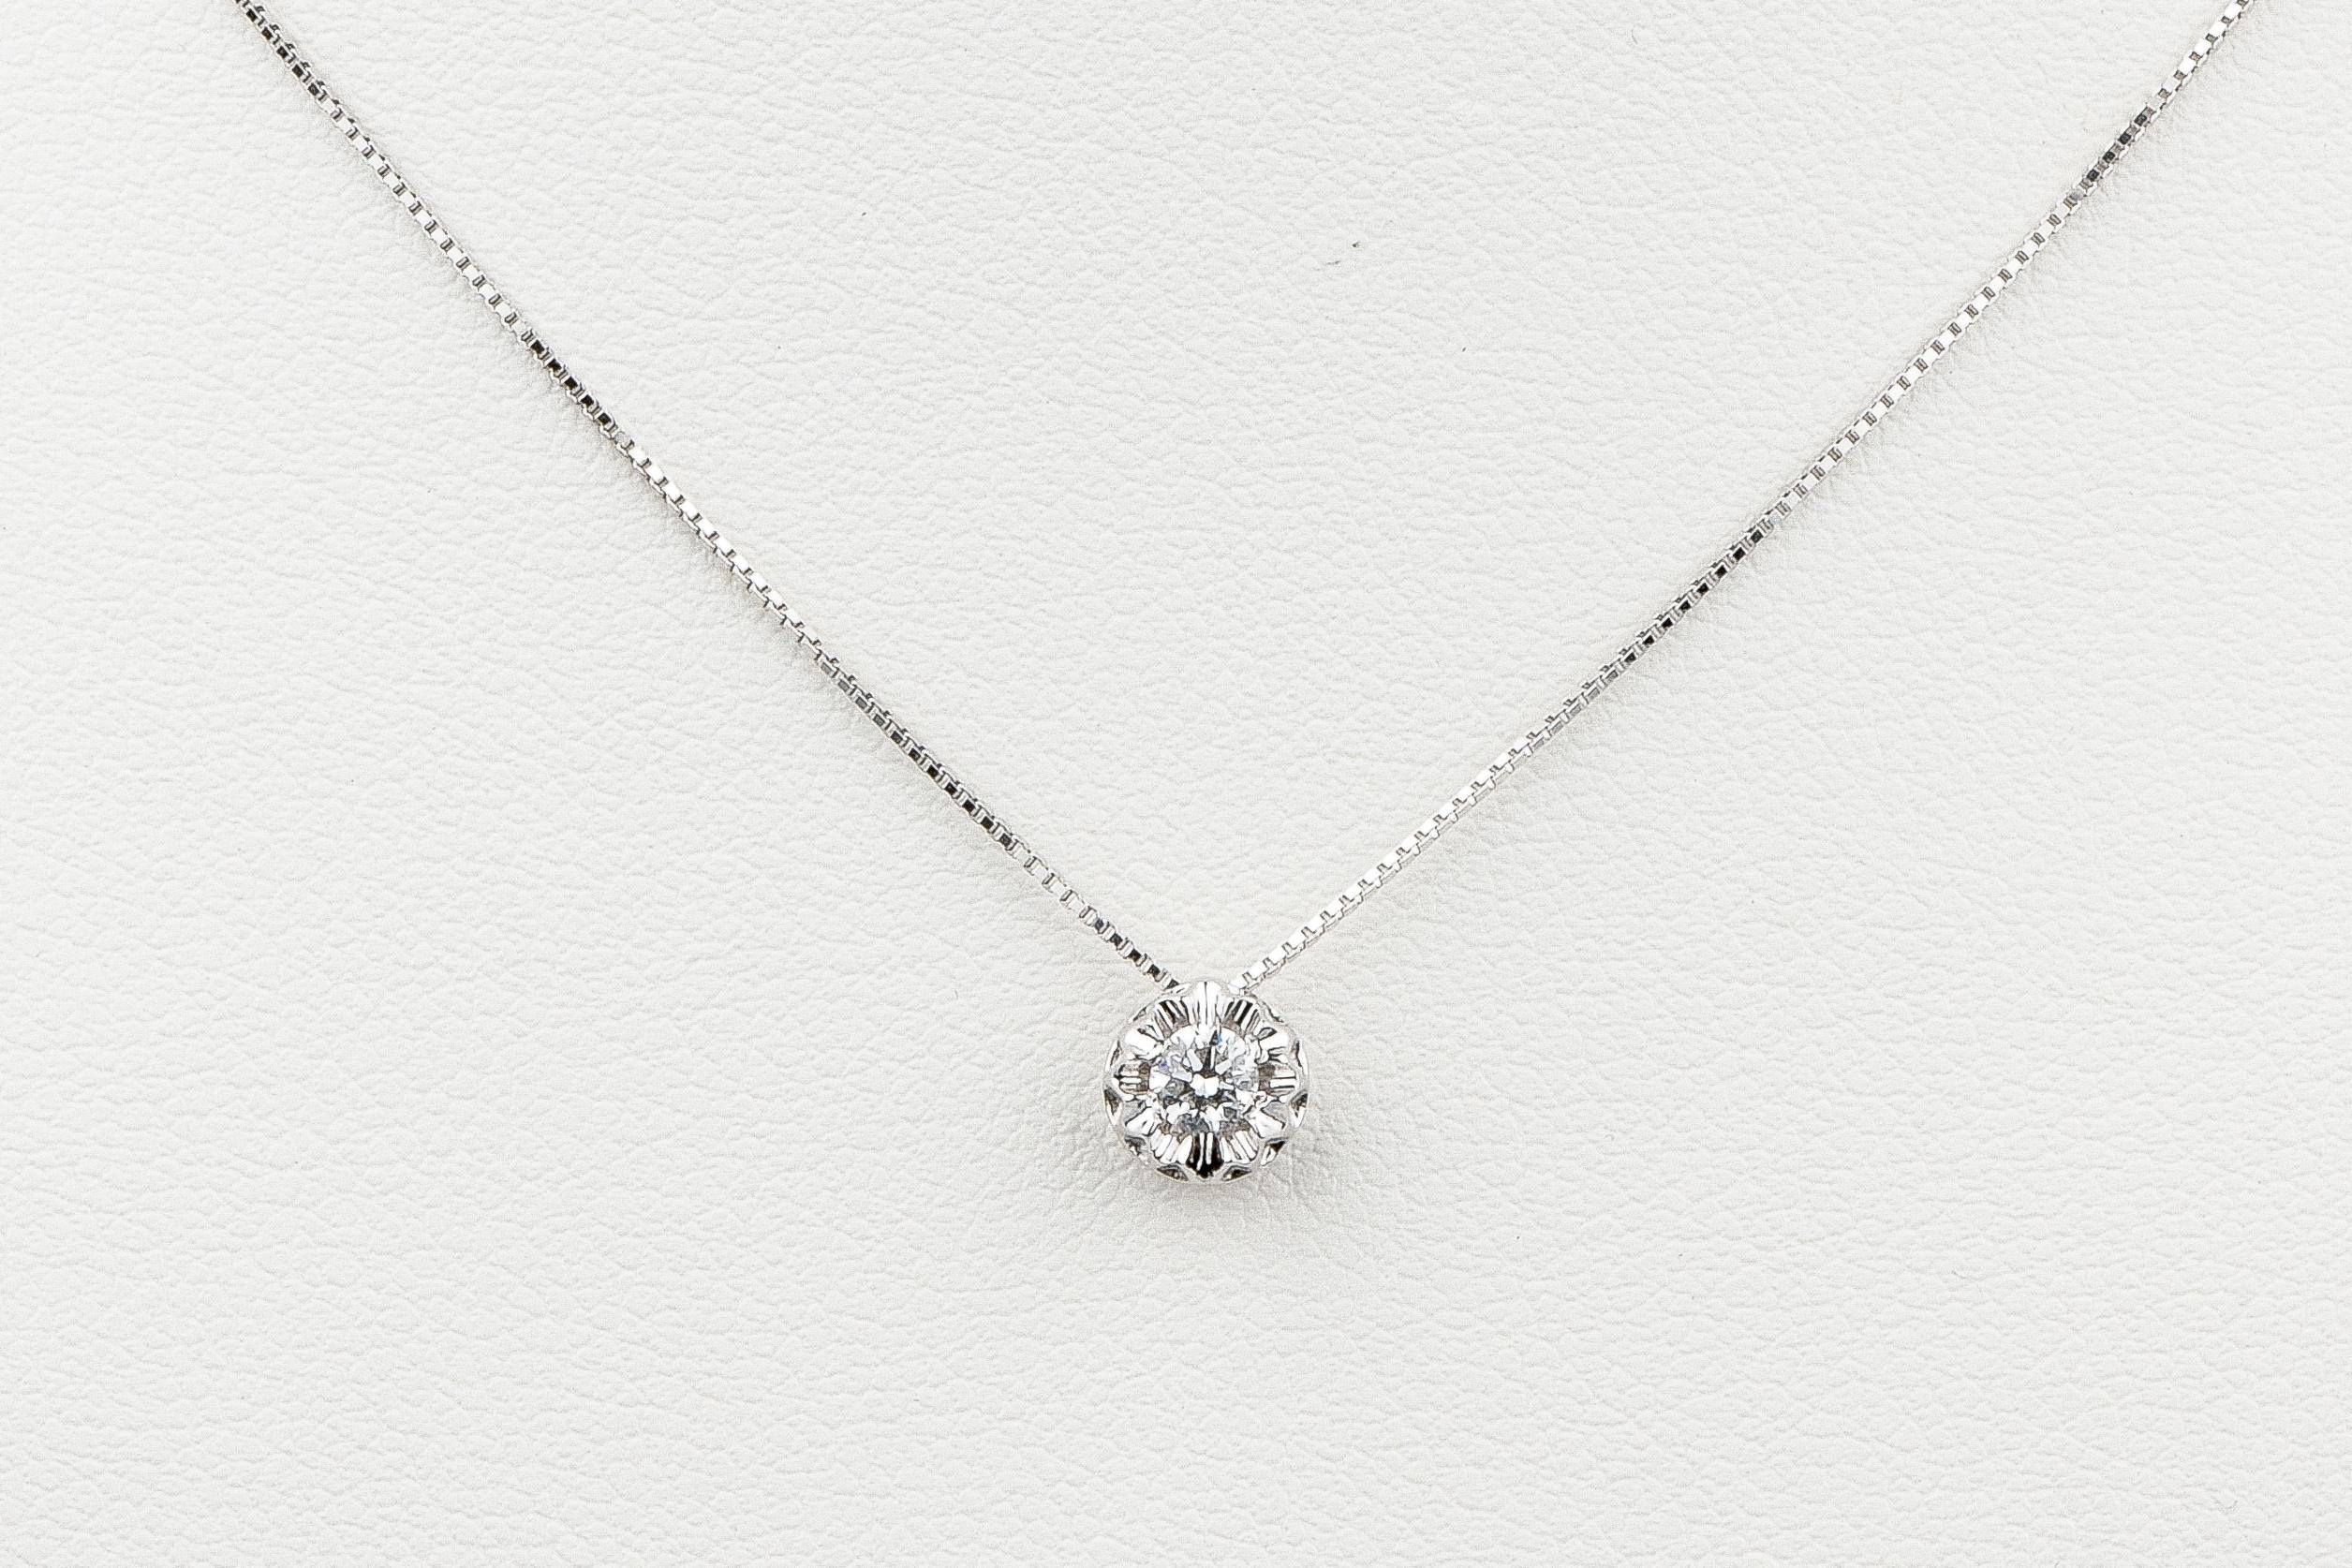 VICTORINNE model, necklace in solid 18K white gold adorned with 1 round brilliant synthetic diamond of 0.10 carat.

• Carats: 0.20 ct total

• Color: DEF

• Clarity: VS

• Venetian mesh, spring ring clasp.

• 1.50 grams

• Dimensions: 42 cm long

•